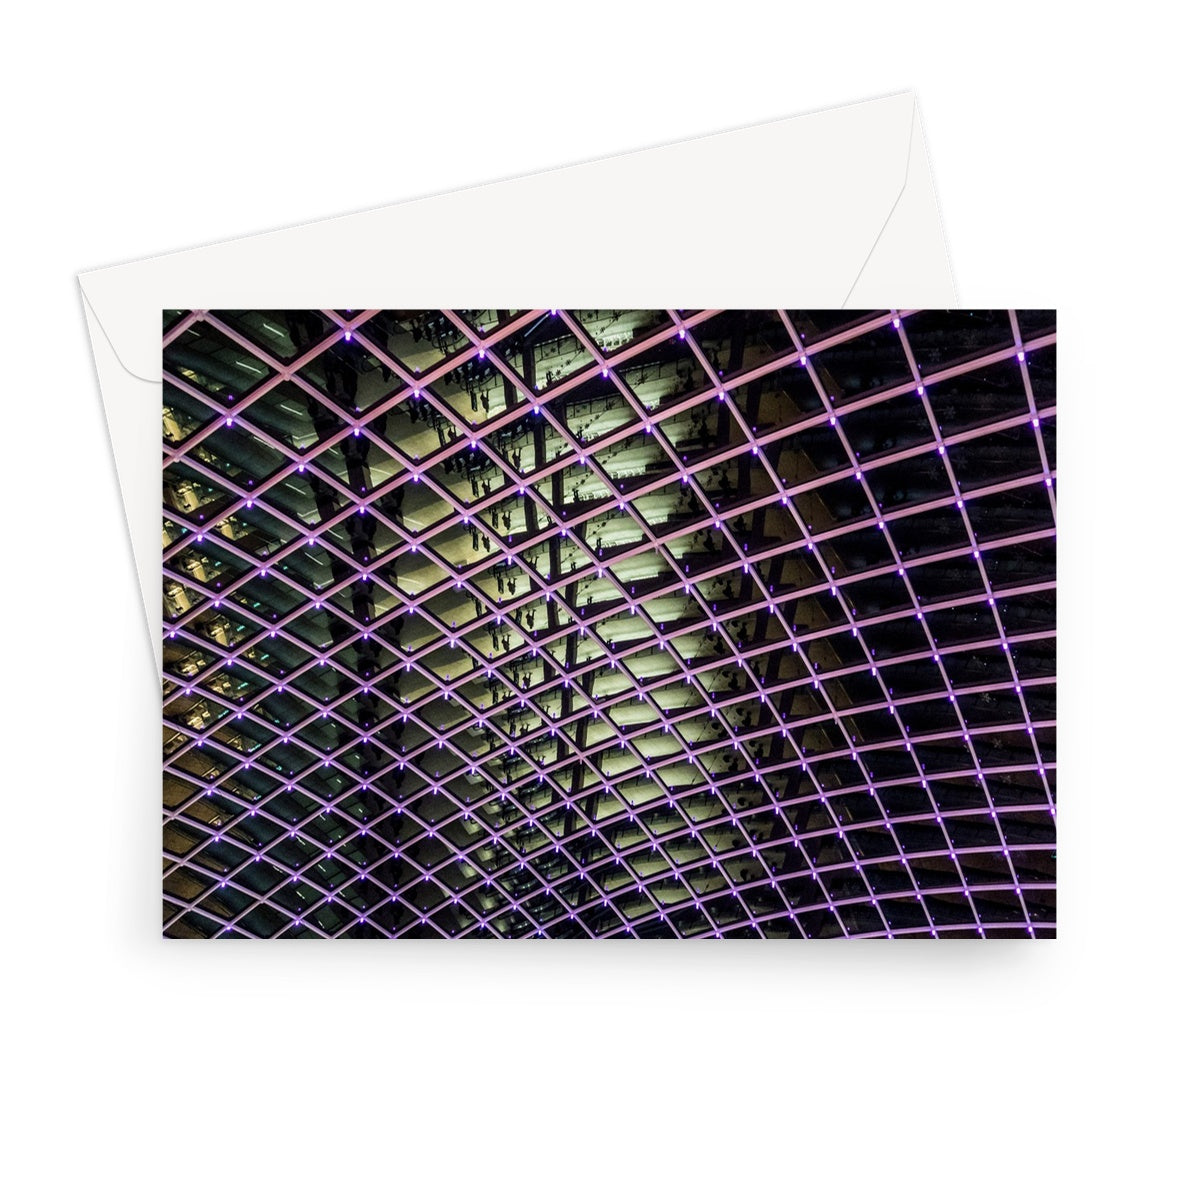 Illuminated grid pattern on a glass ceiling captured at night Greeting Card